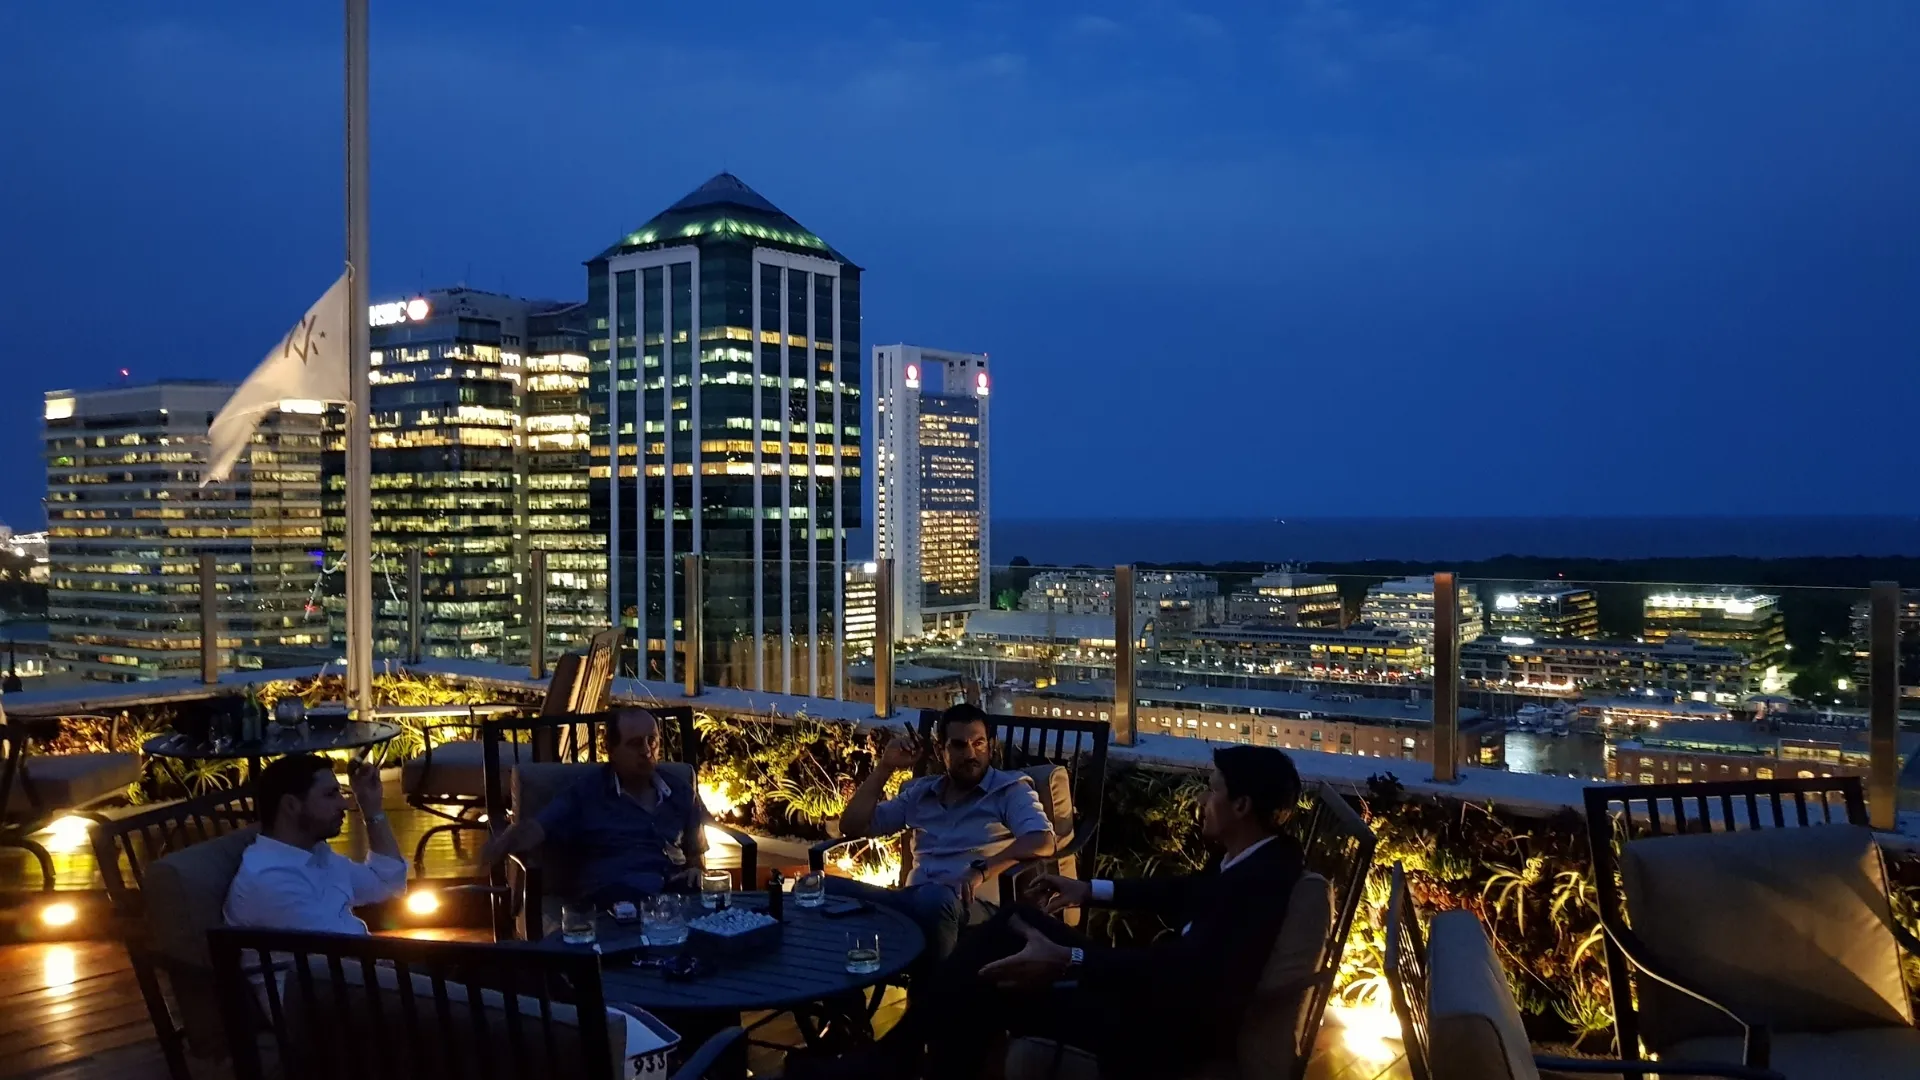 Trade Sky Bar in Argentina, South America | Observation Decks,Bars - Rated 4.8